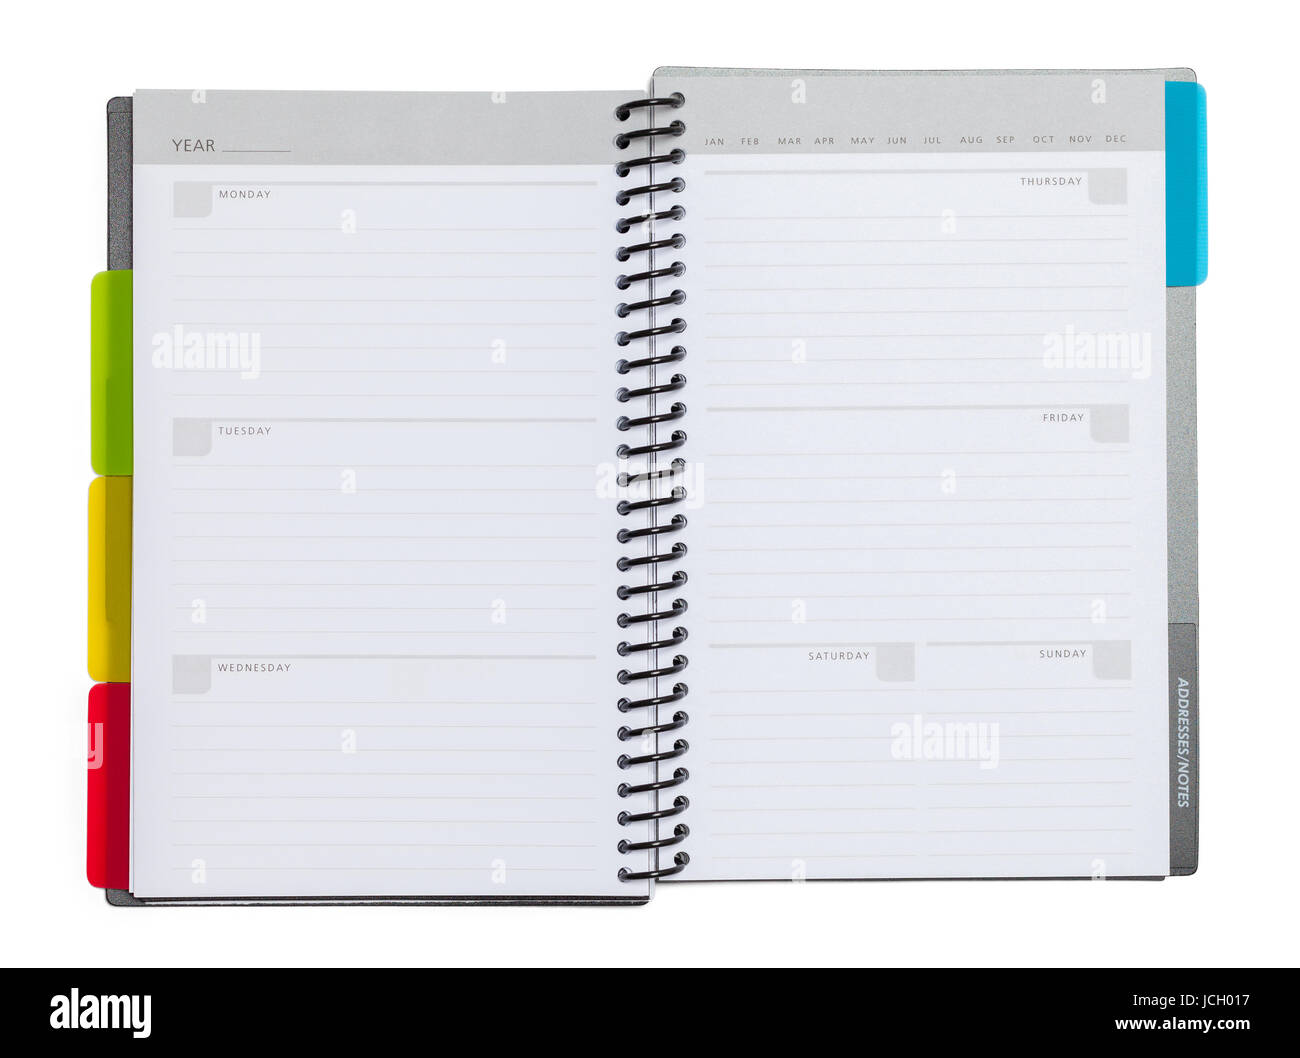 Calendar Planner Isolated on White Background. Stock Photo